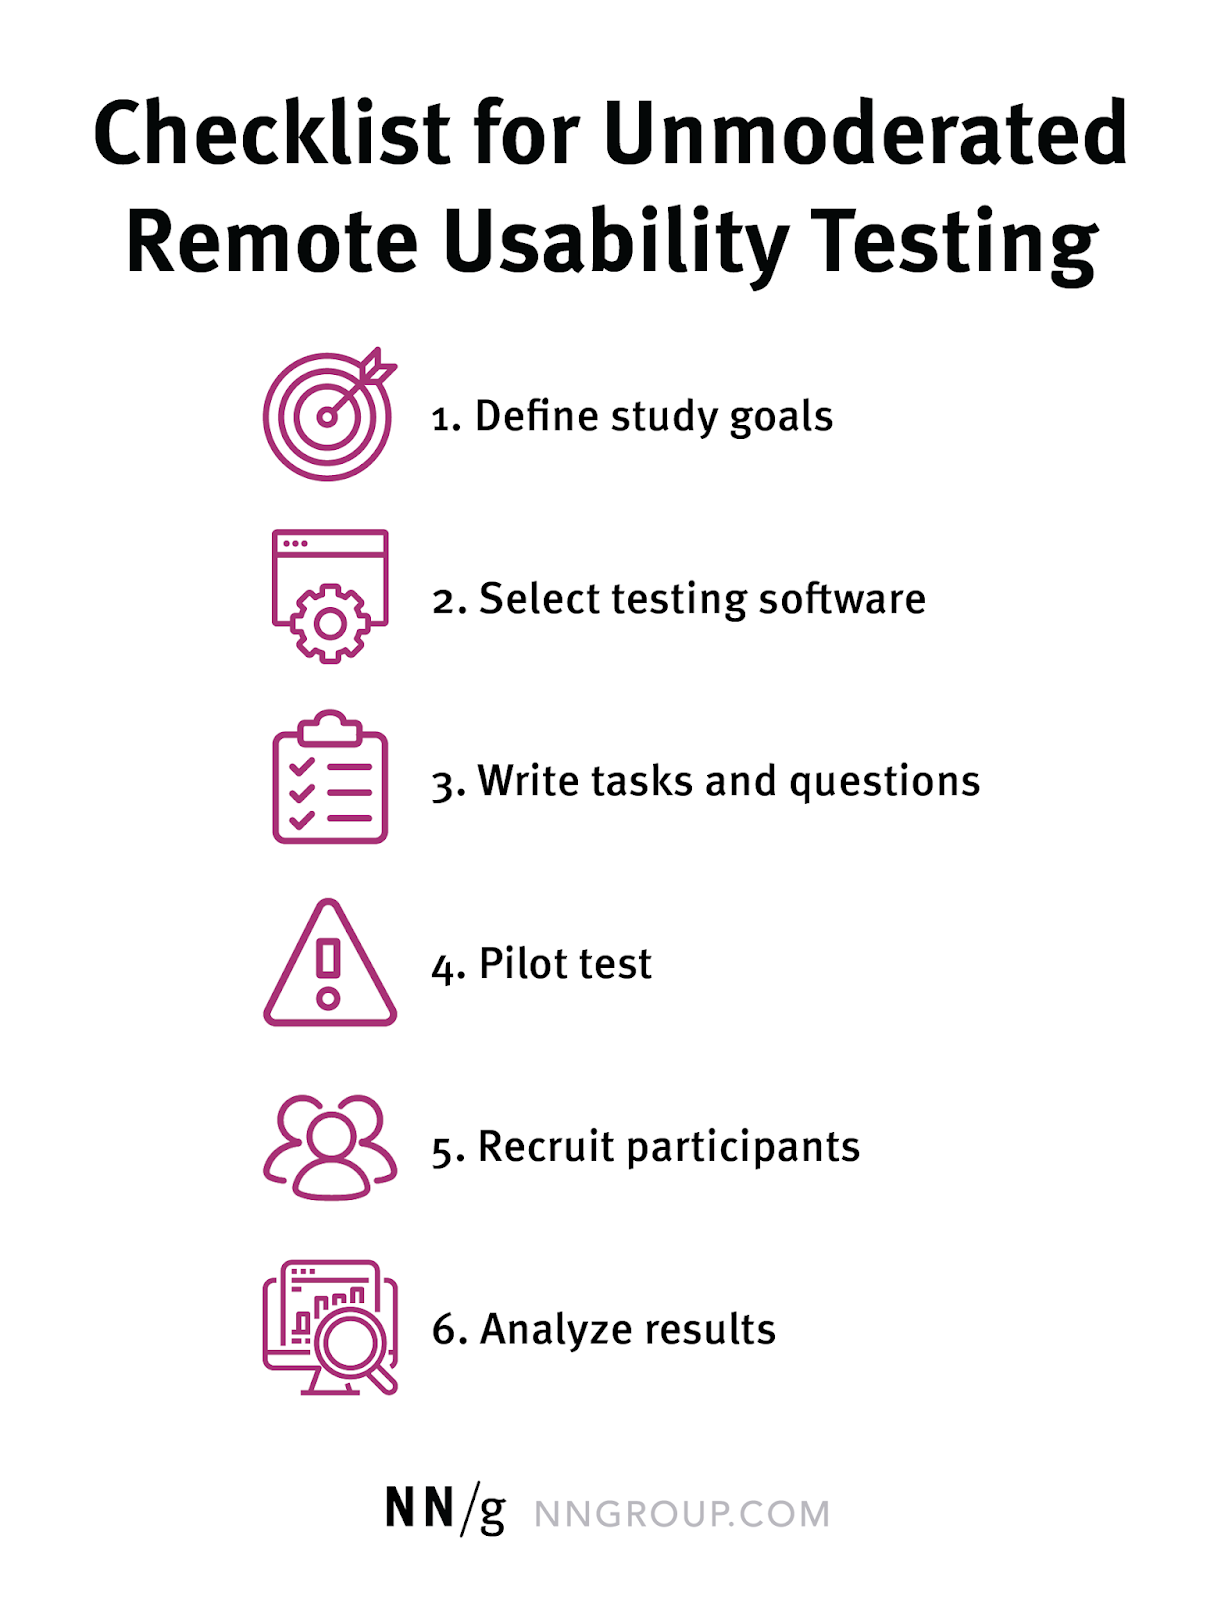 Unmoderated usability testing checklist